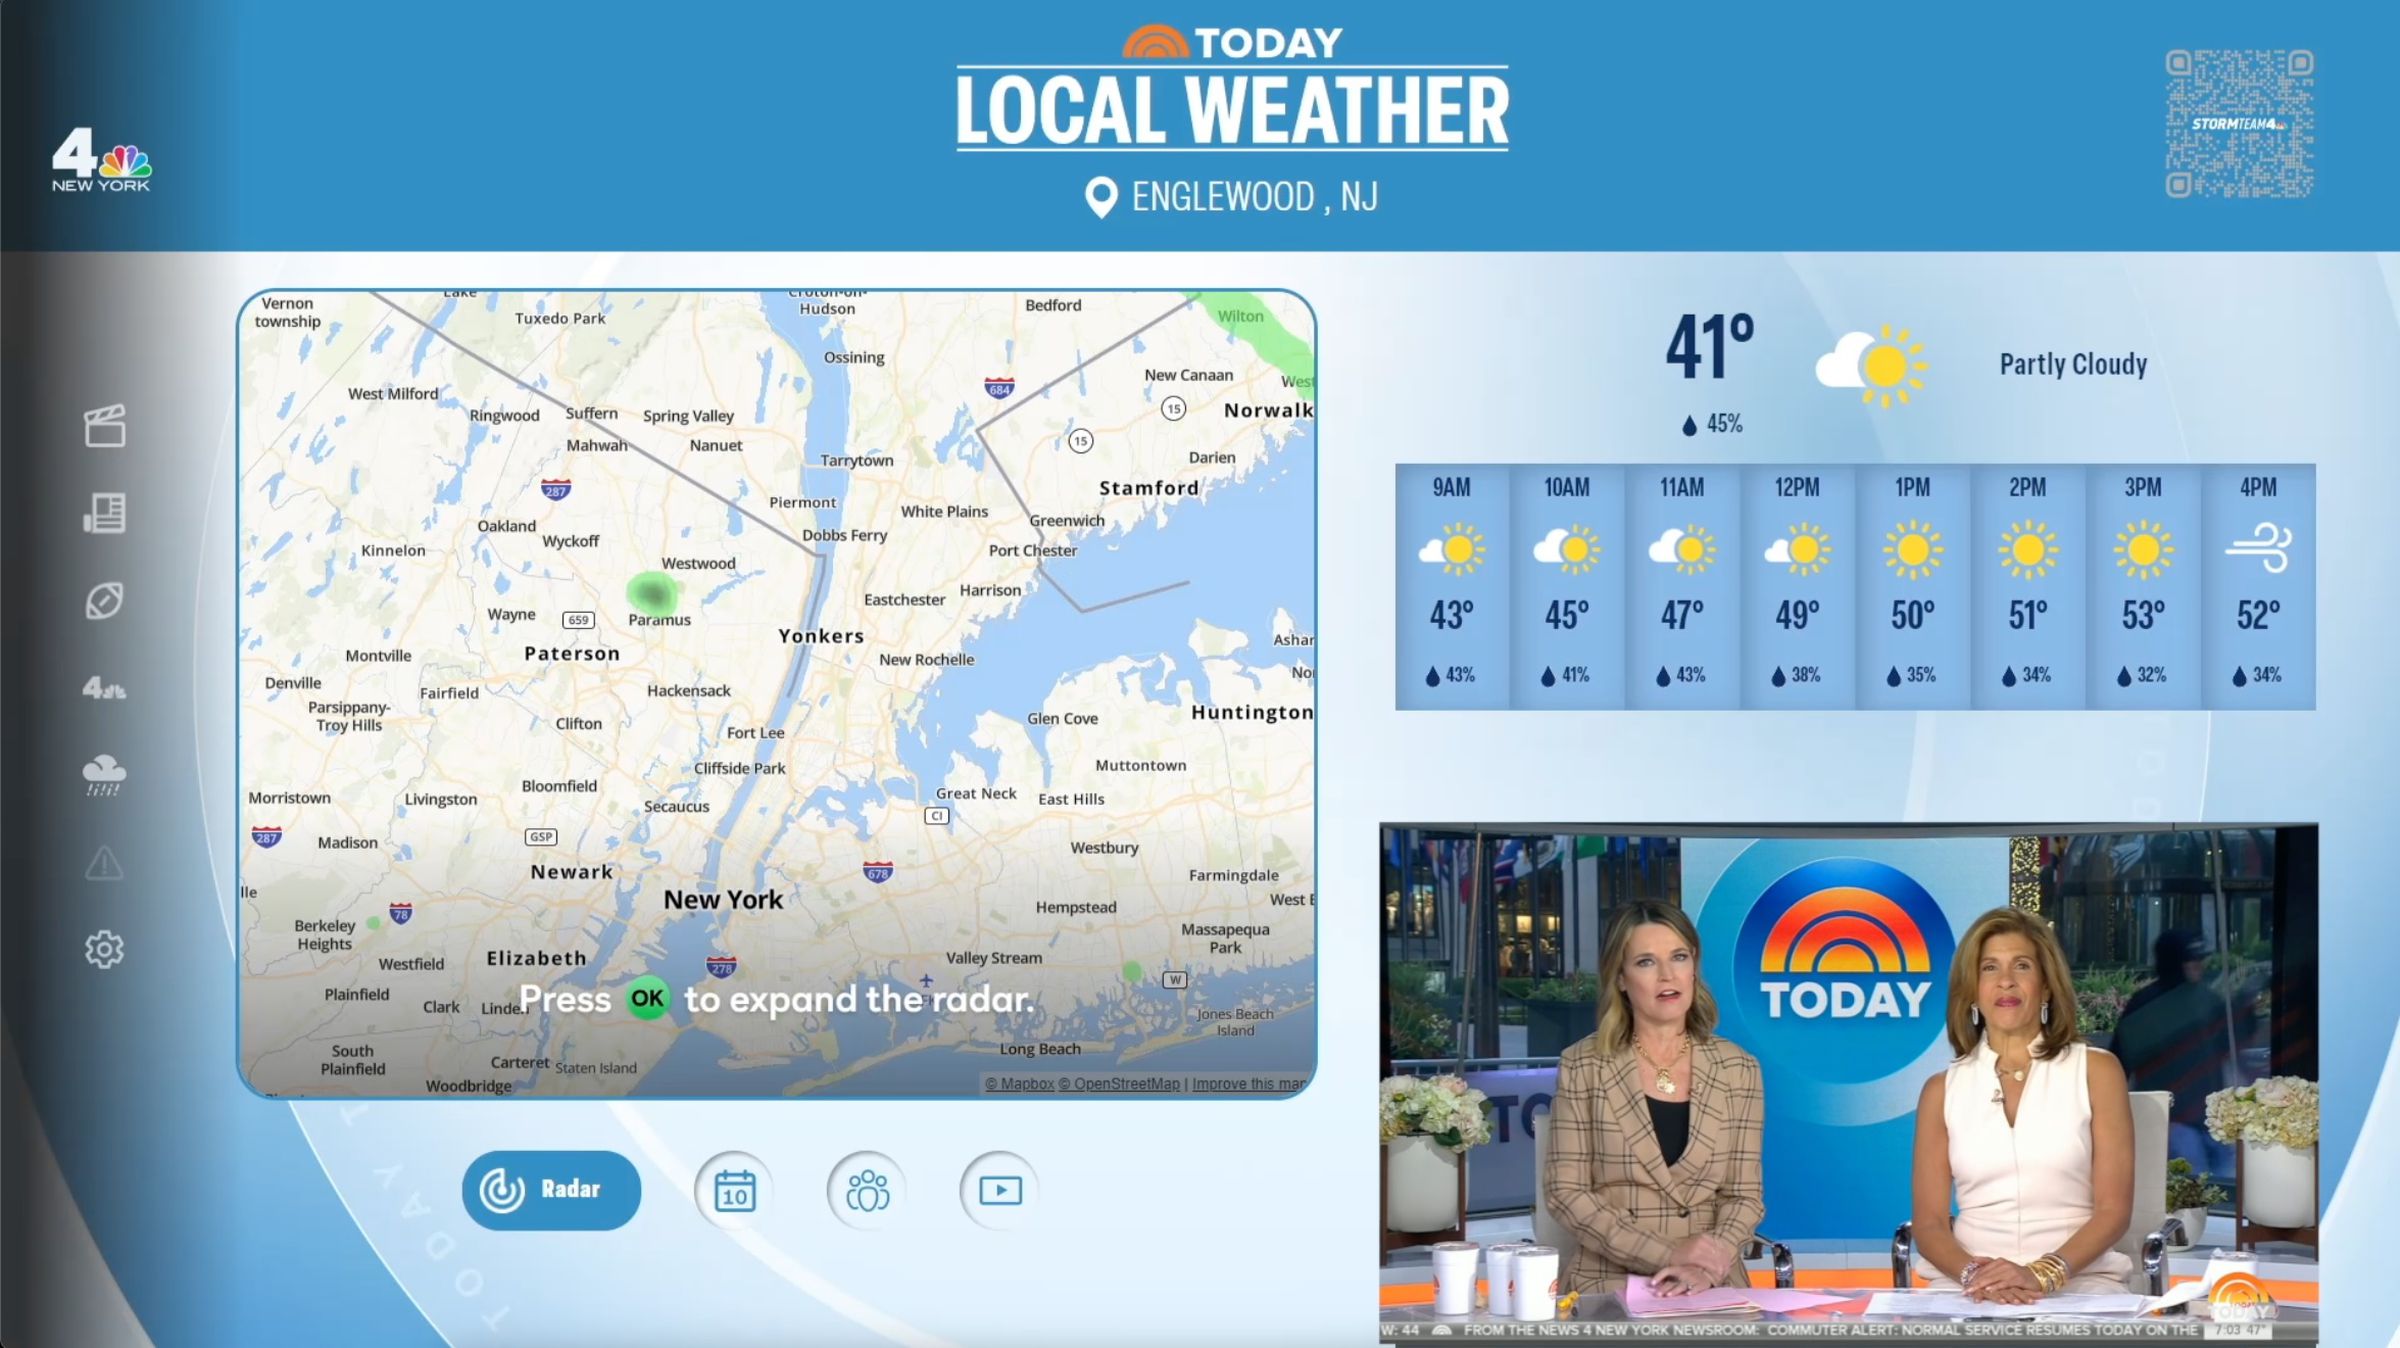 An image of a large display of local weather with the Today show playing in the lower-right corner.